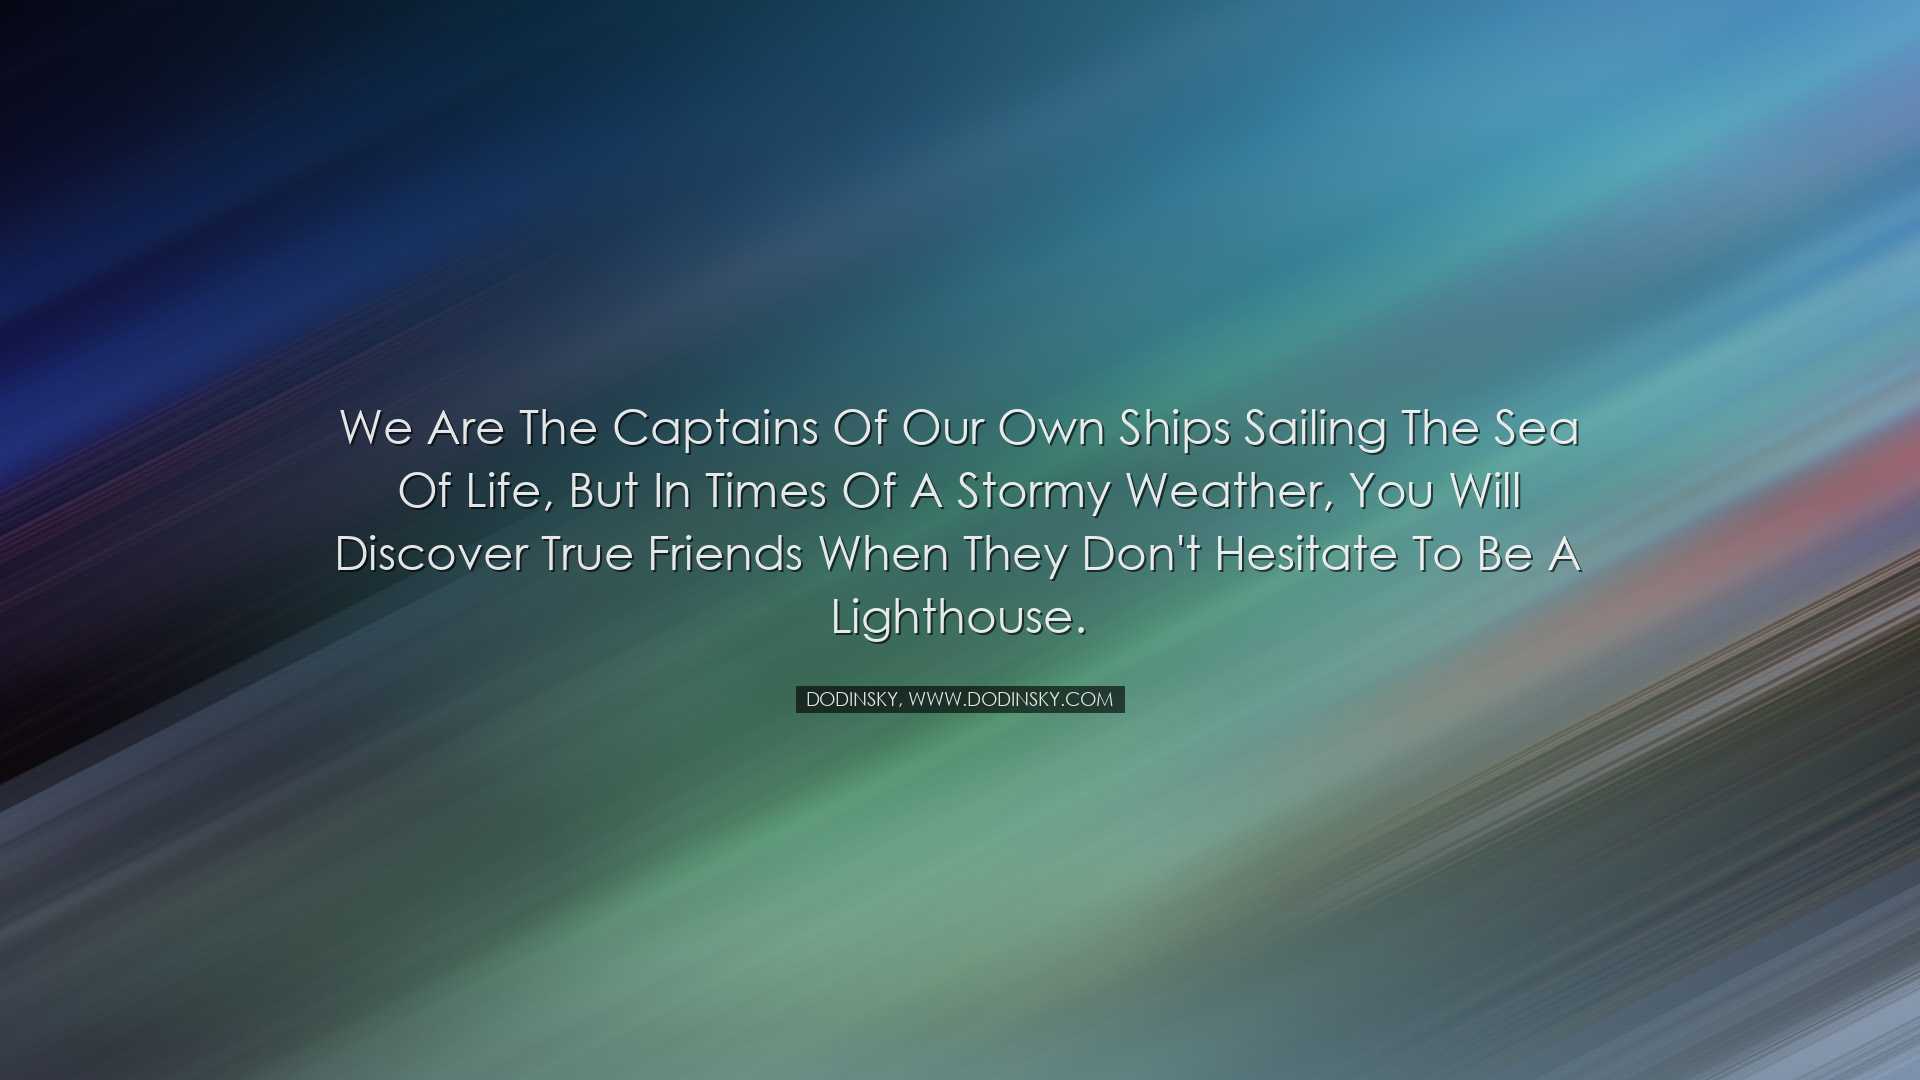 We are the captains of our own ships sailing the sea of life, but